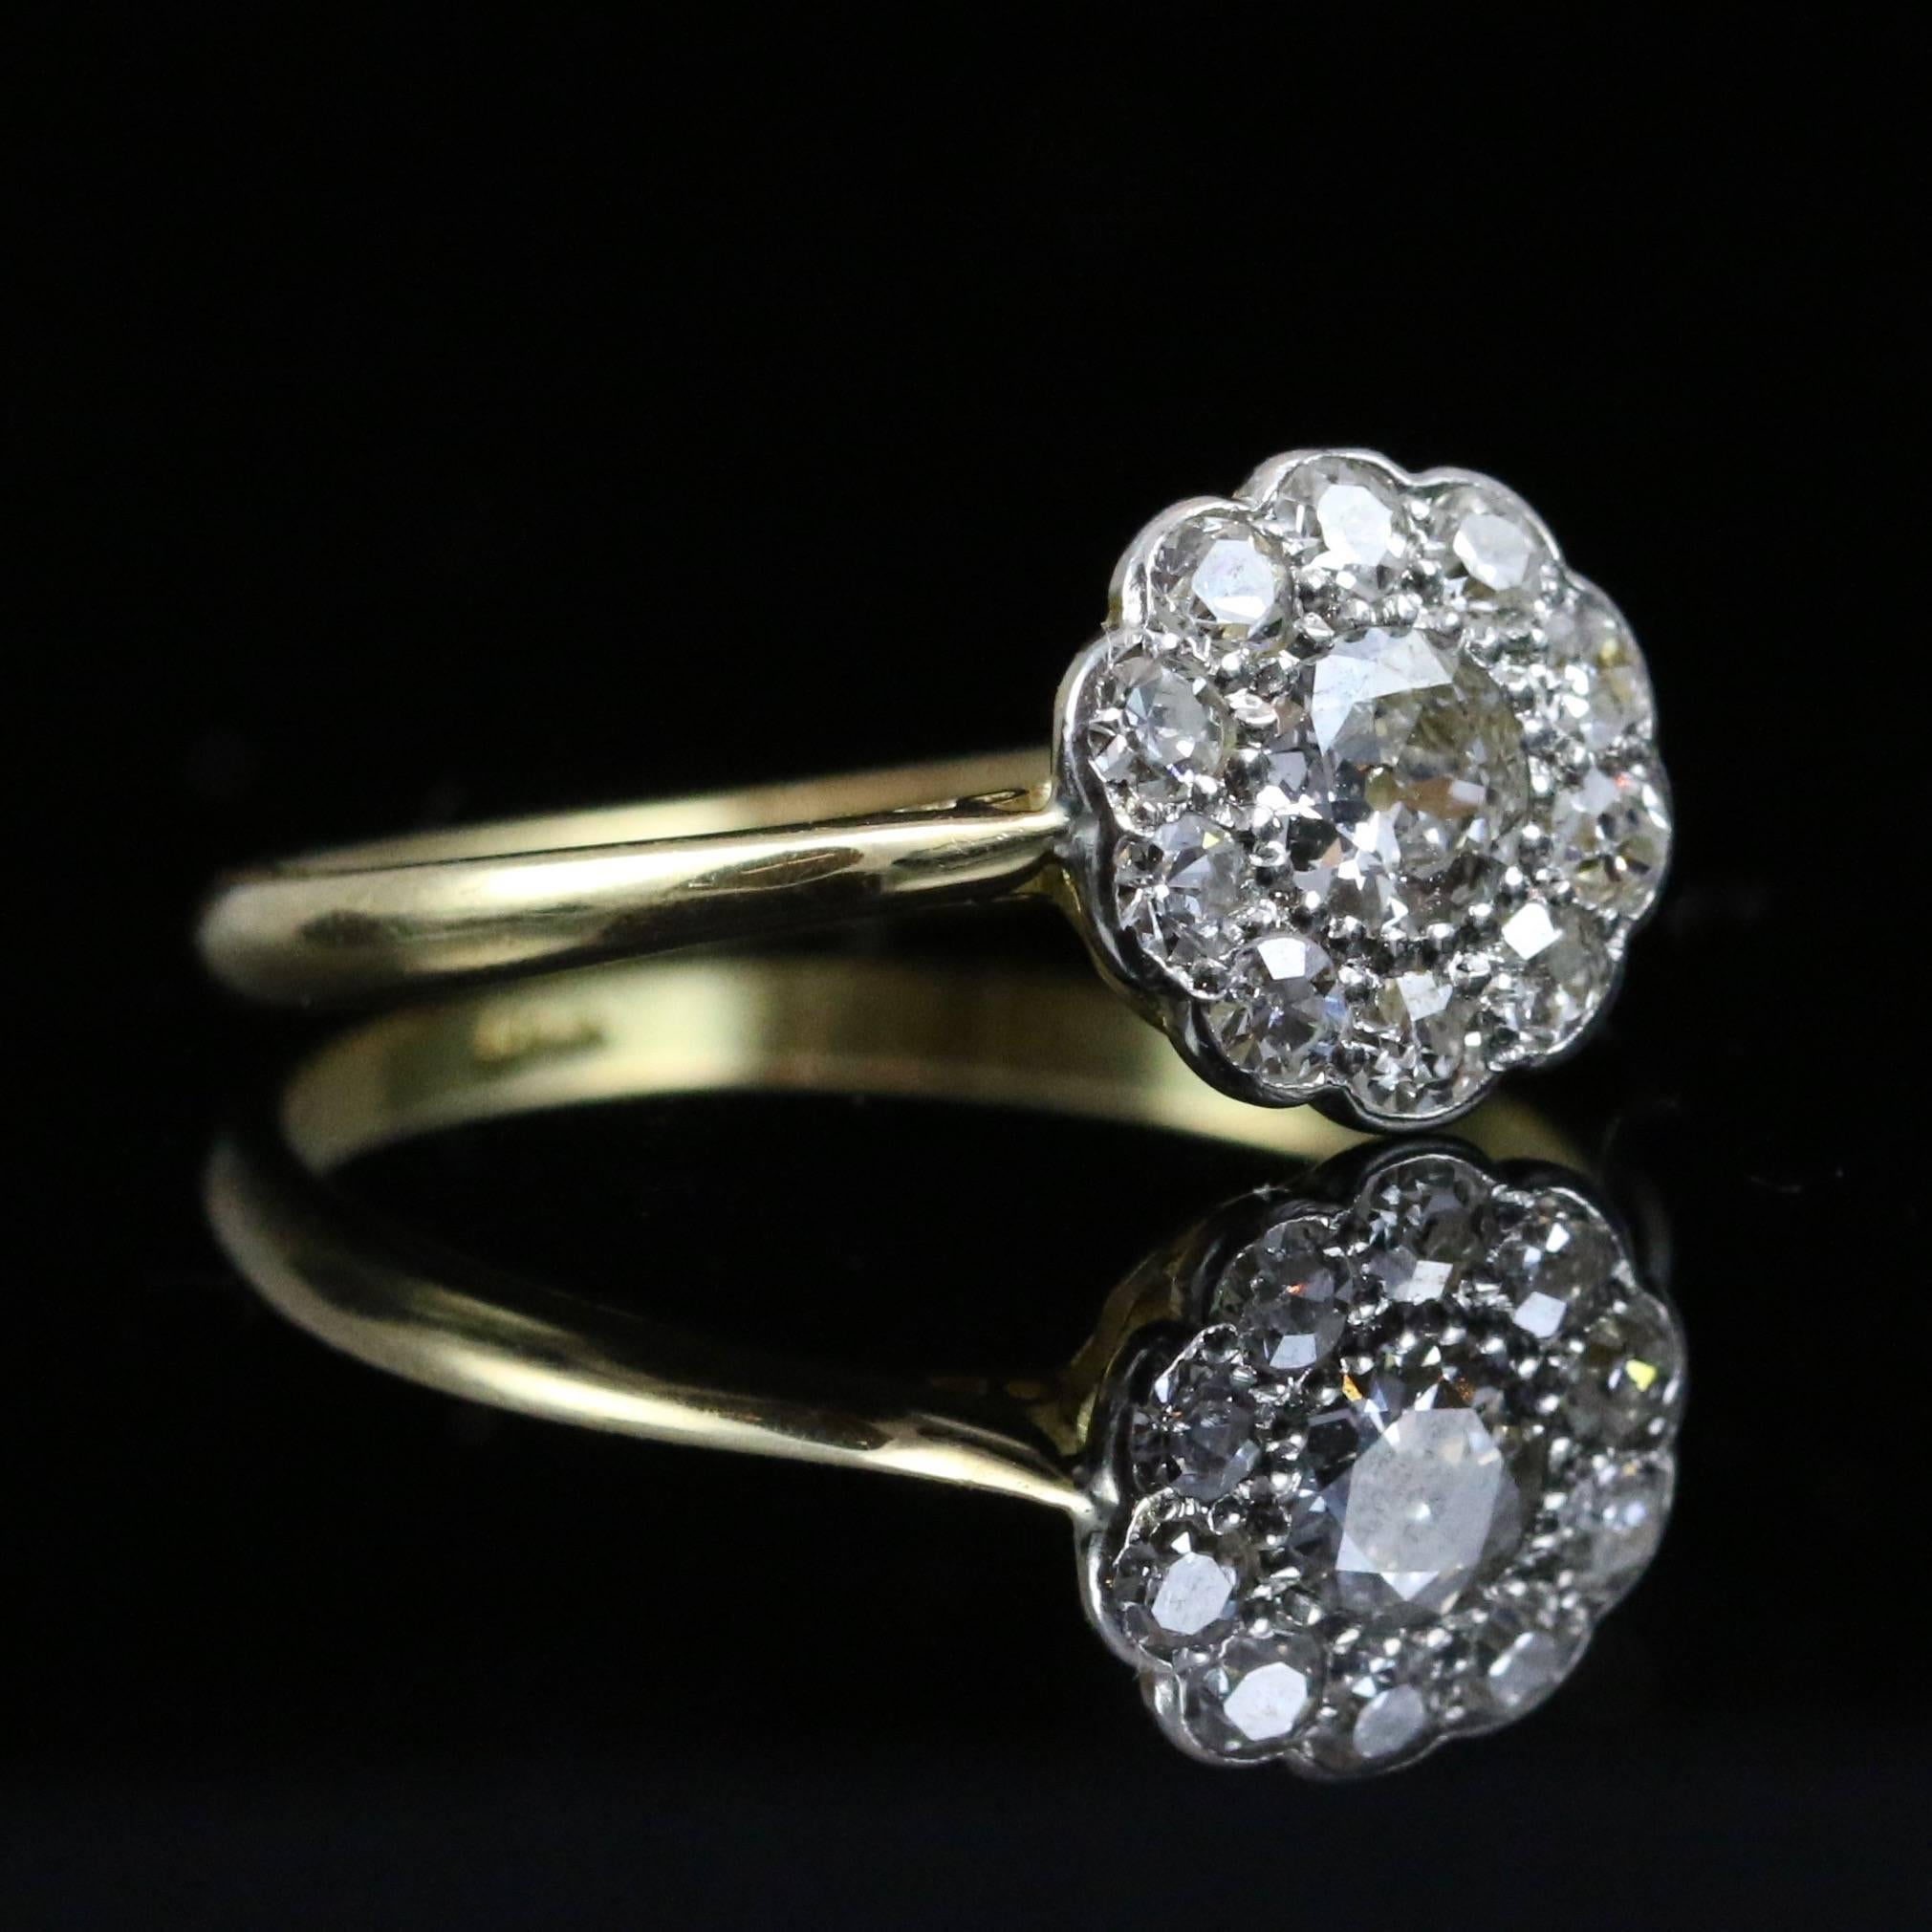 This beautiful Antique Victorian 18ct yellow gold white gold cluster ring boasts stunning Old Cut Diamonds approx. 1ct in total. 

The Diamonds are original to the ring which is Circa 1900's 

The centre Diamond is 0.45ct with smaller Diamonds